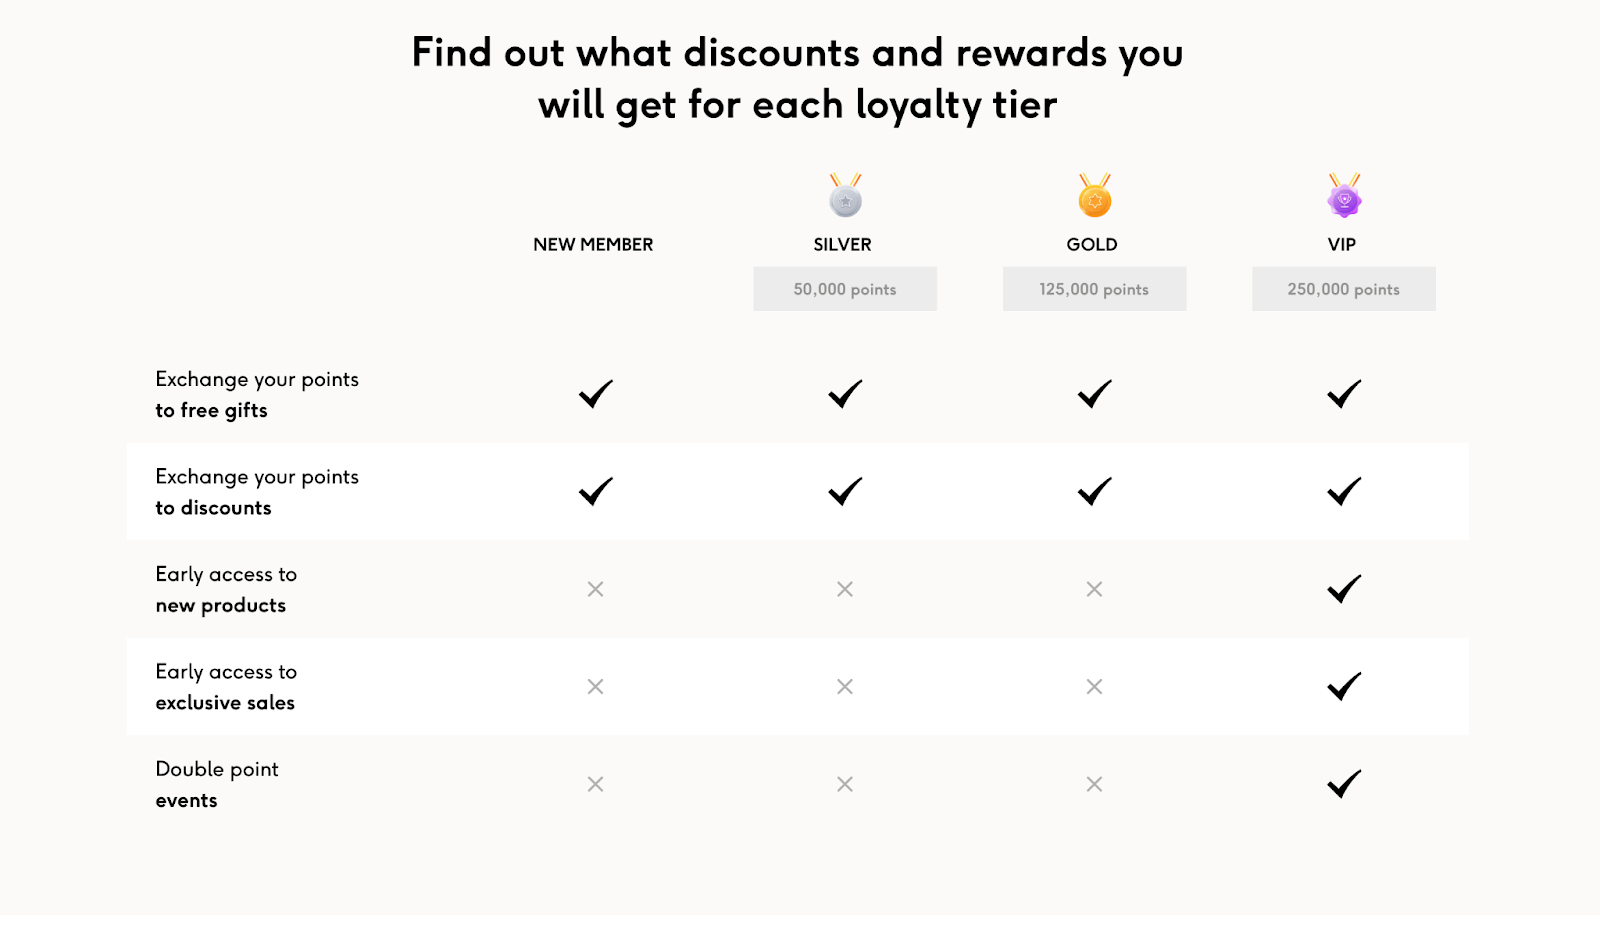 Feel discounts and rewards